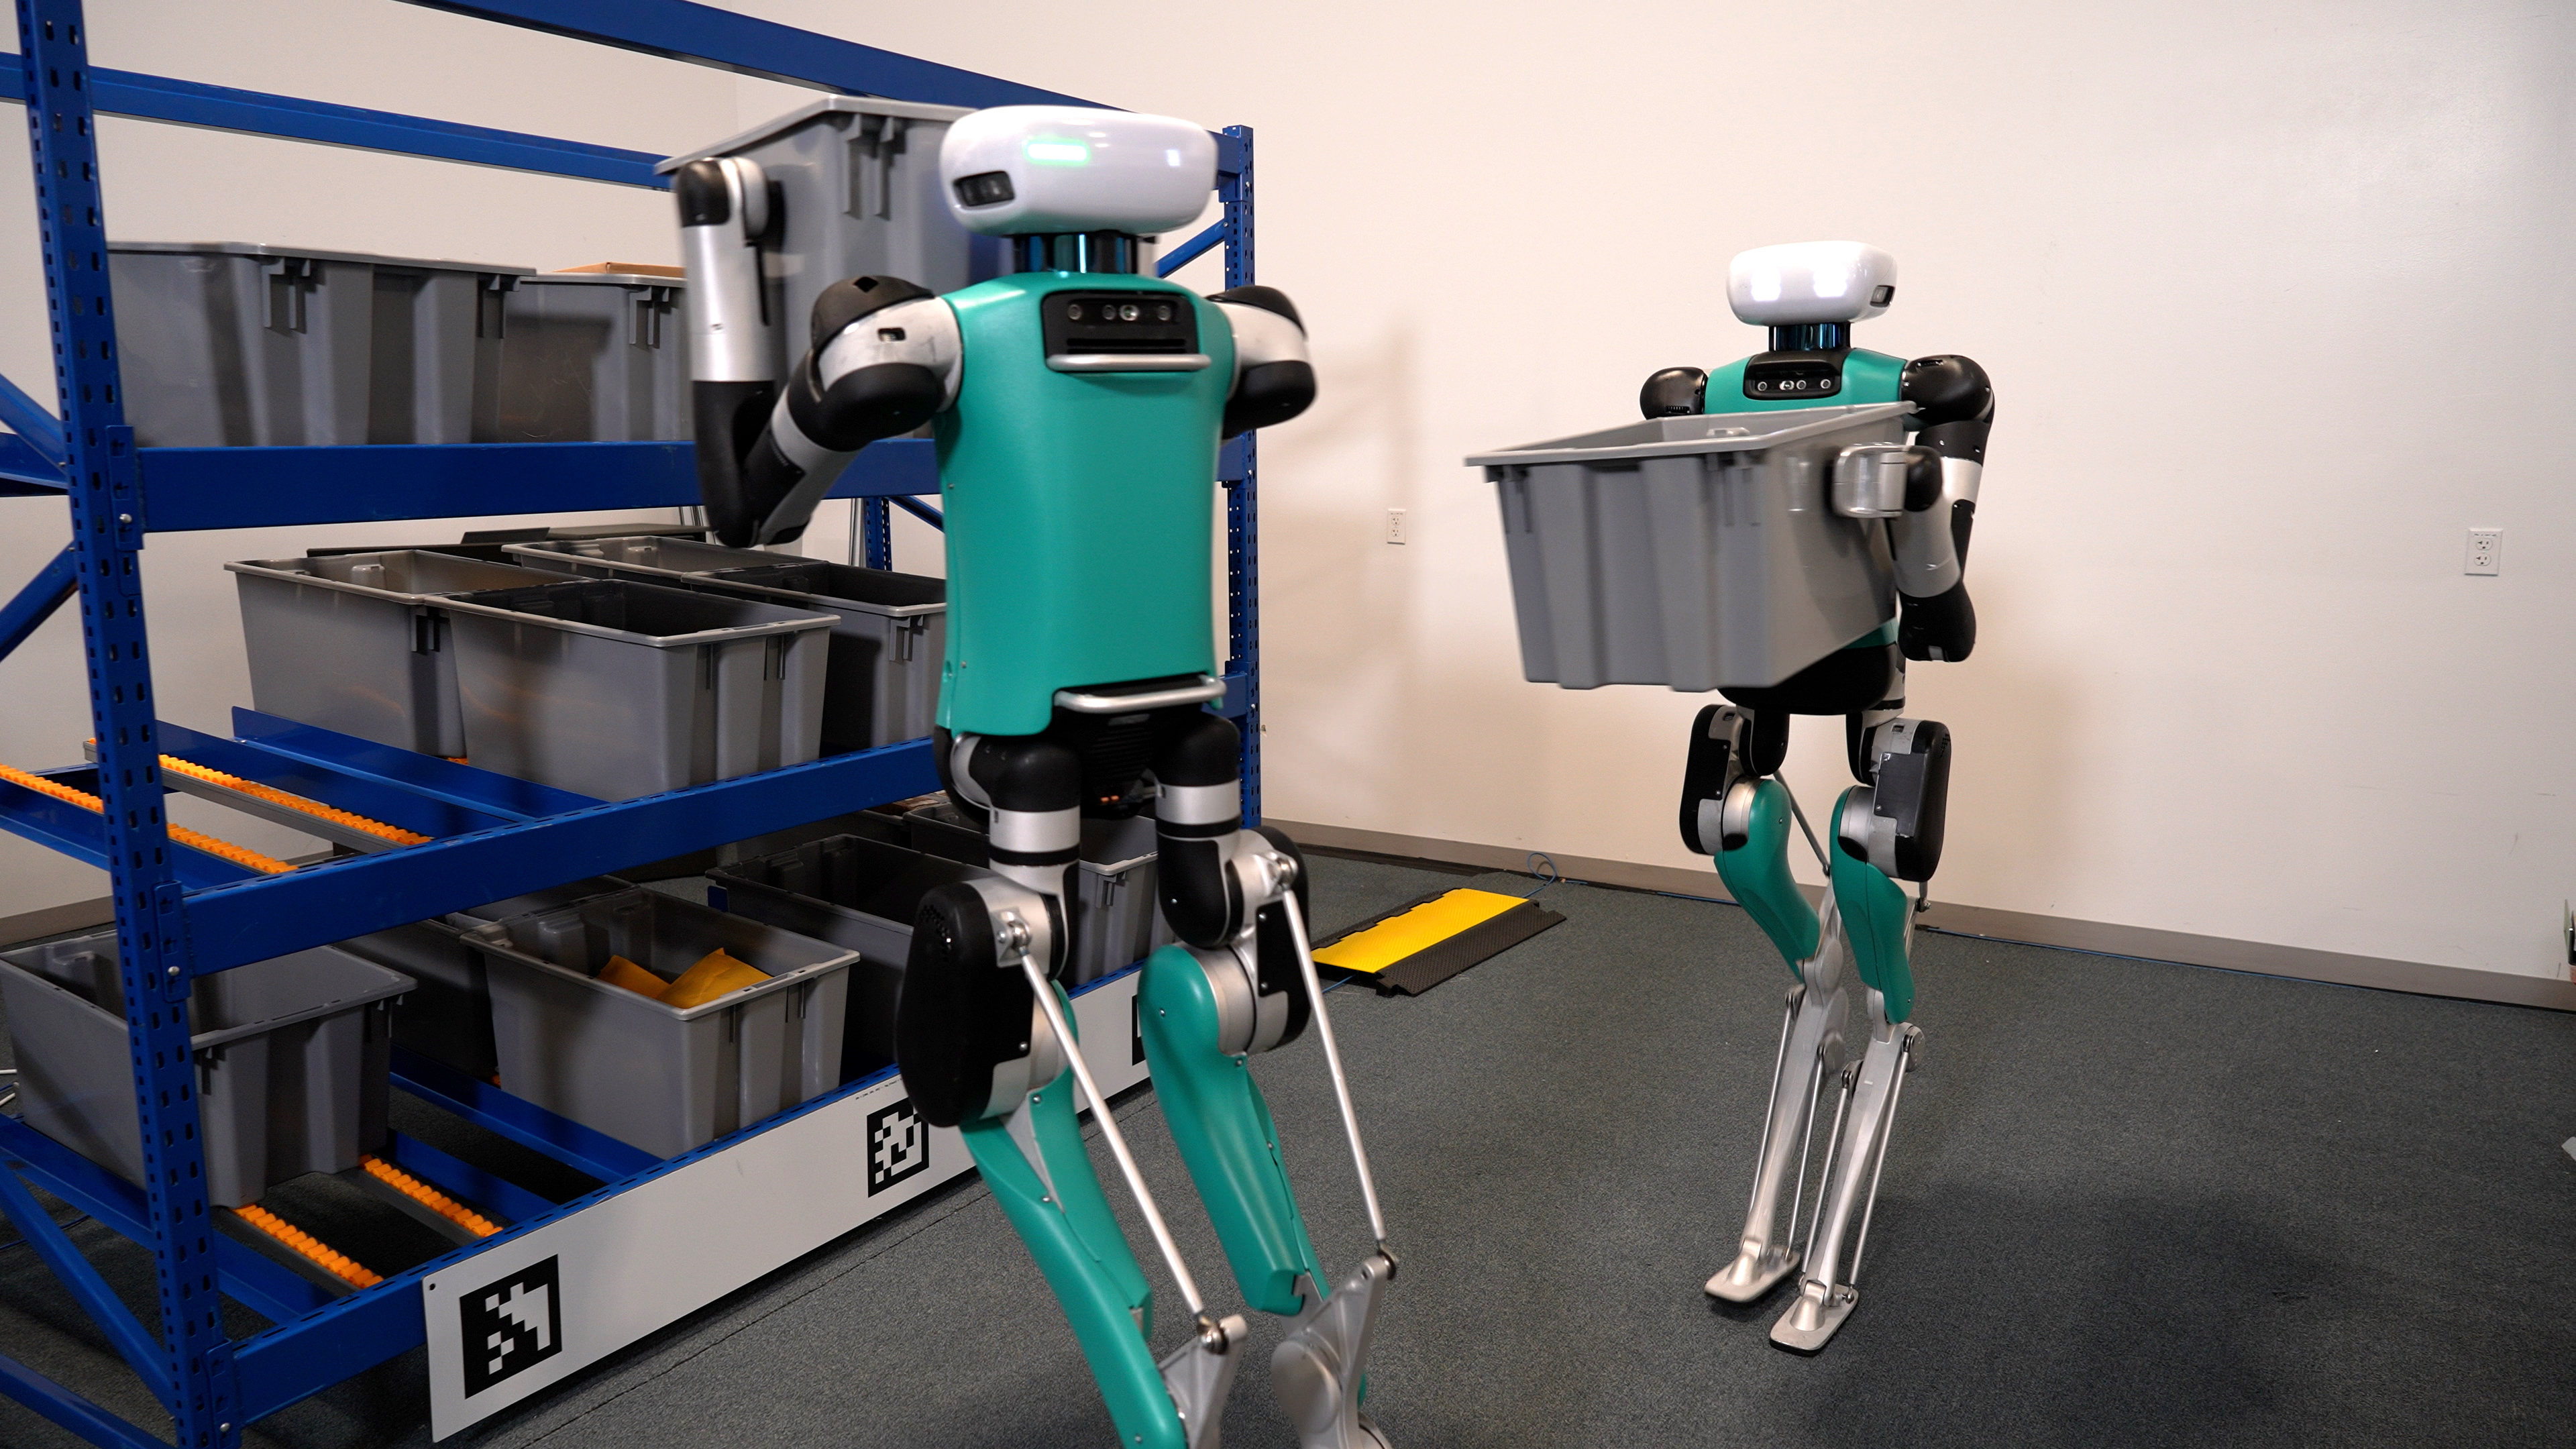 Agility Robotics Launches Next Generation of Digit: World's First Human-Centric, Multi-Purpose Robot made for Logistics | Business